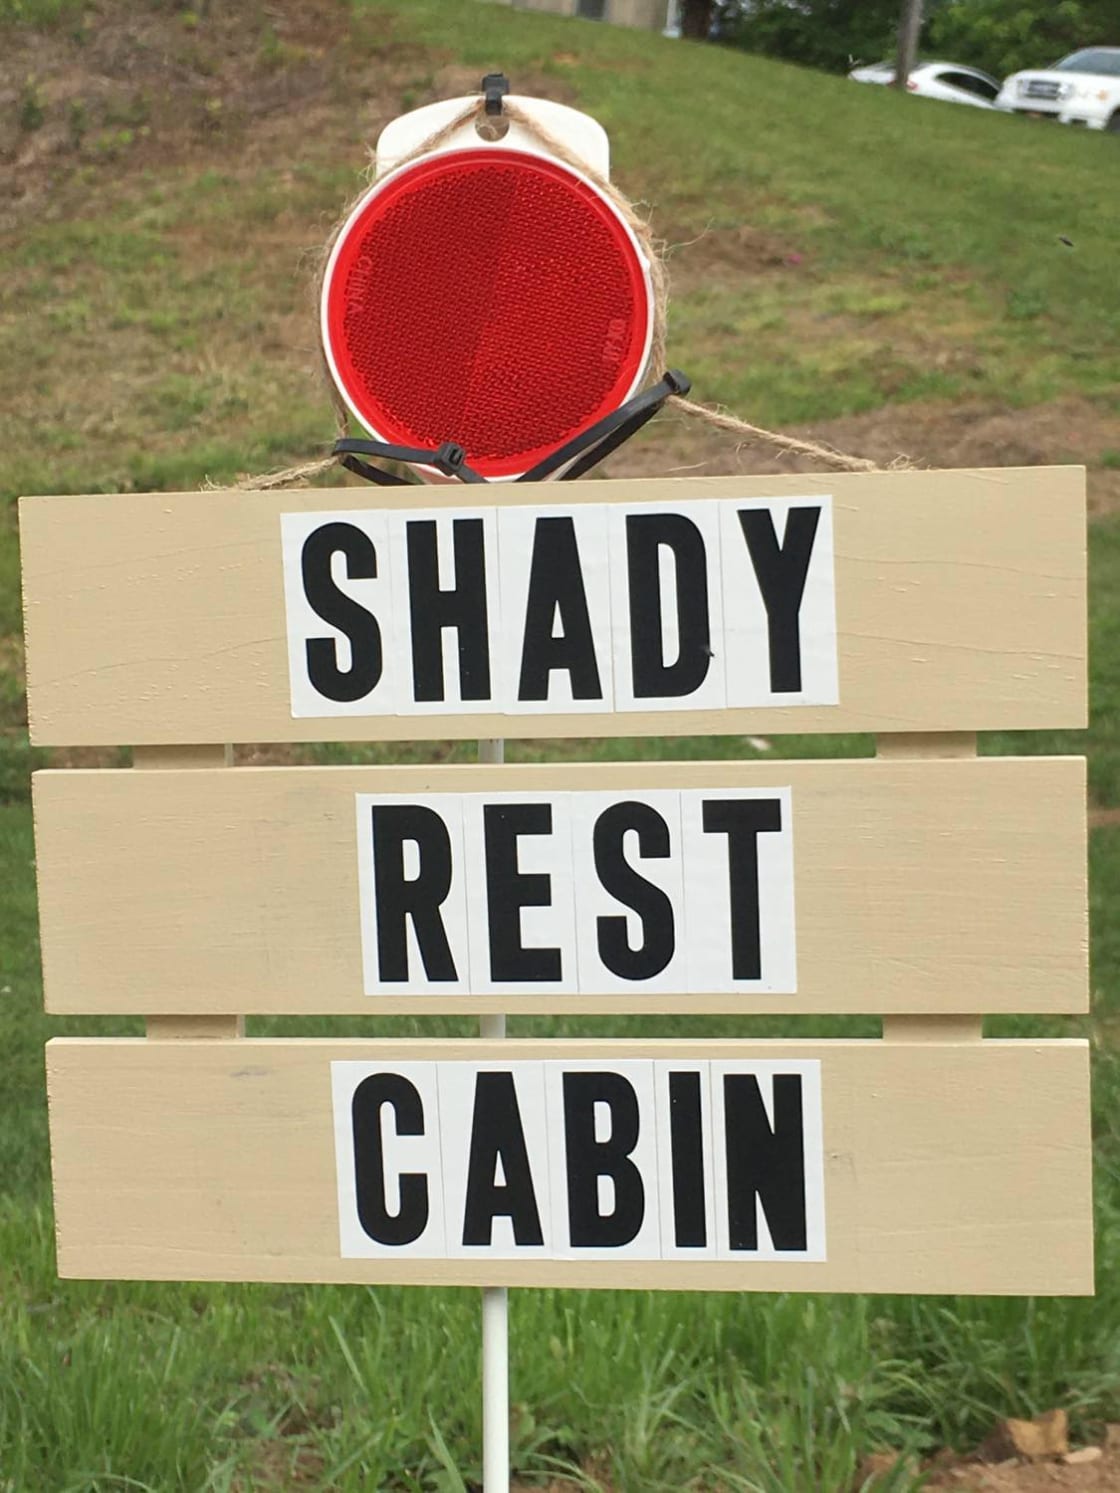 Shady Rest Cabin